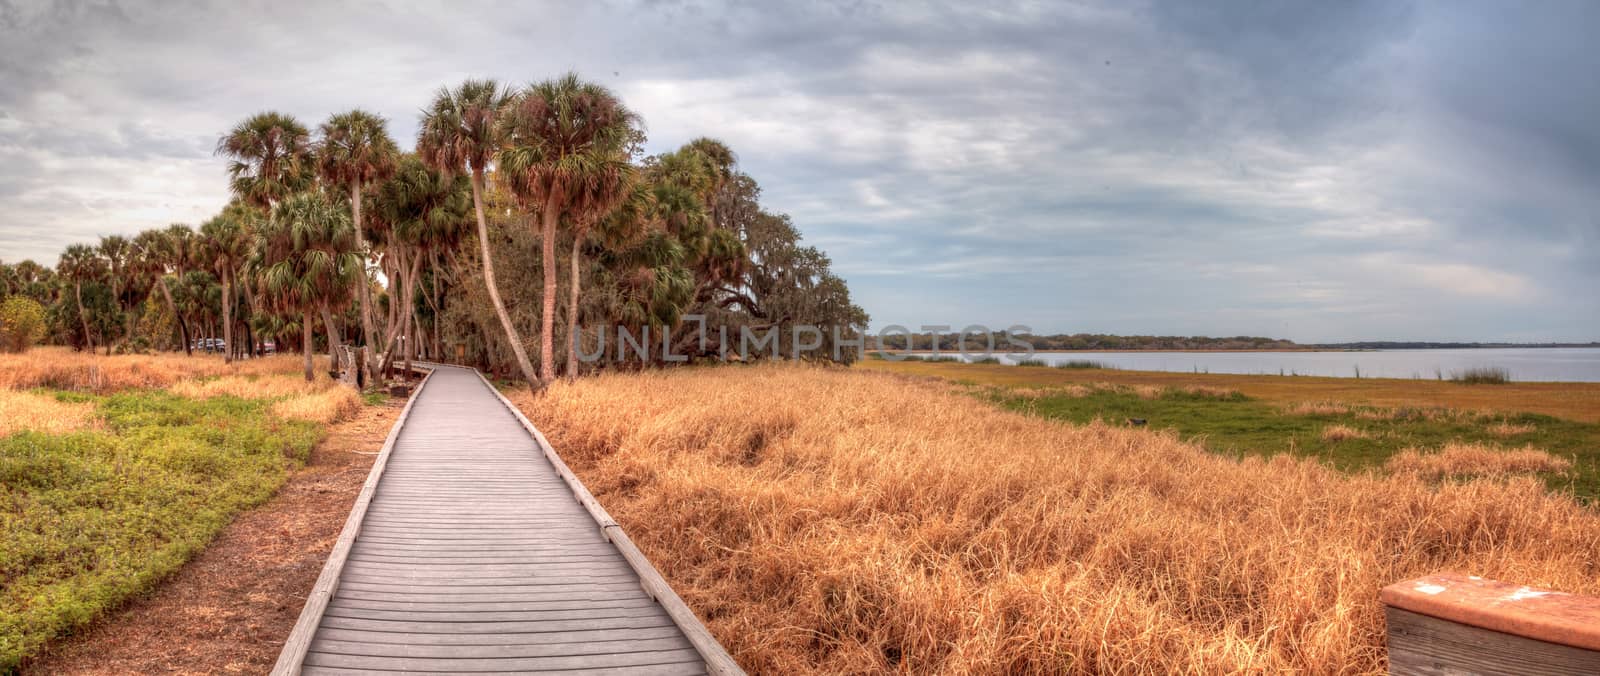 Boardwalk along the wetland and marsh at the Myakka River State  by steffstarr